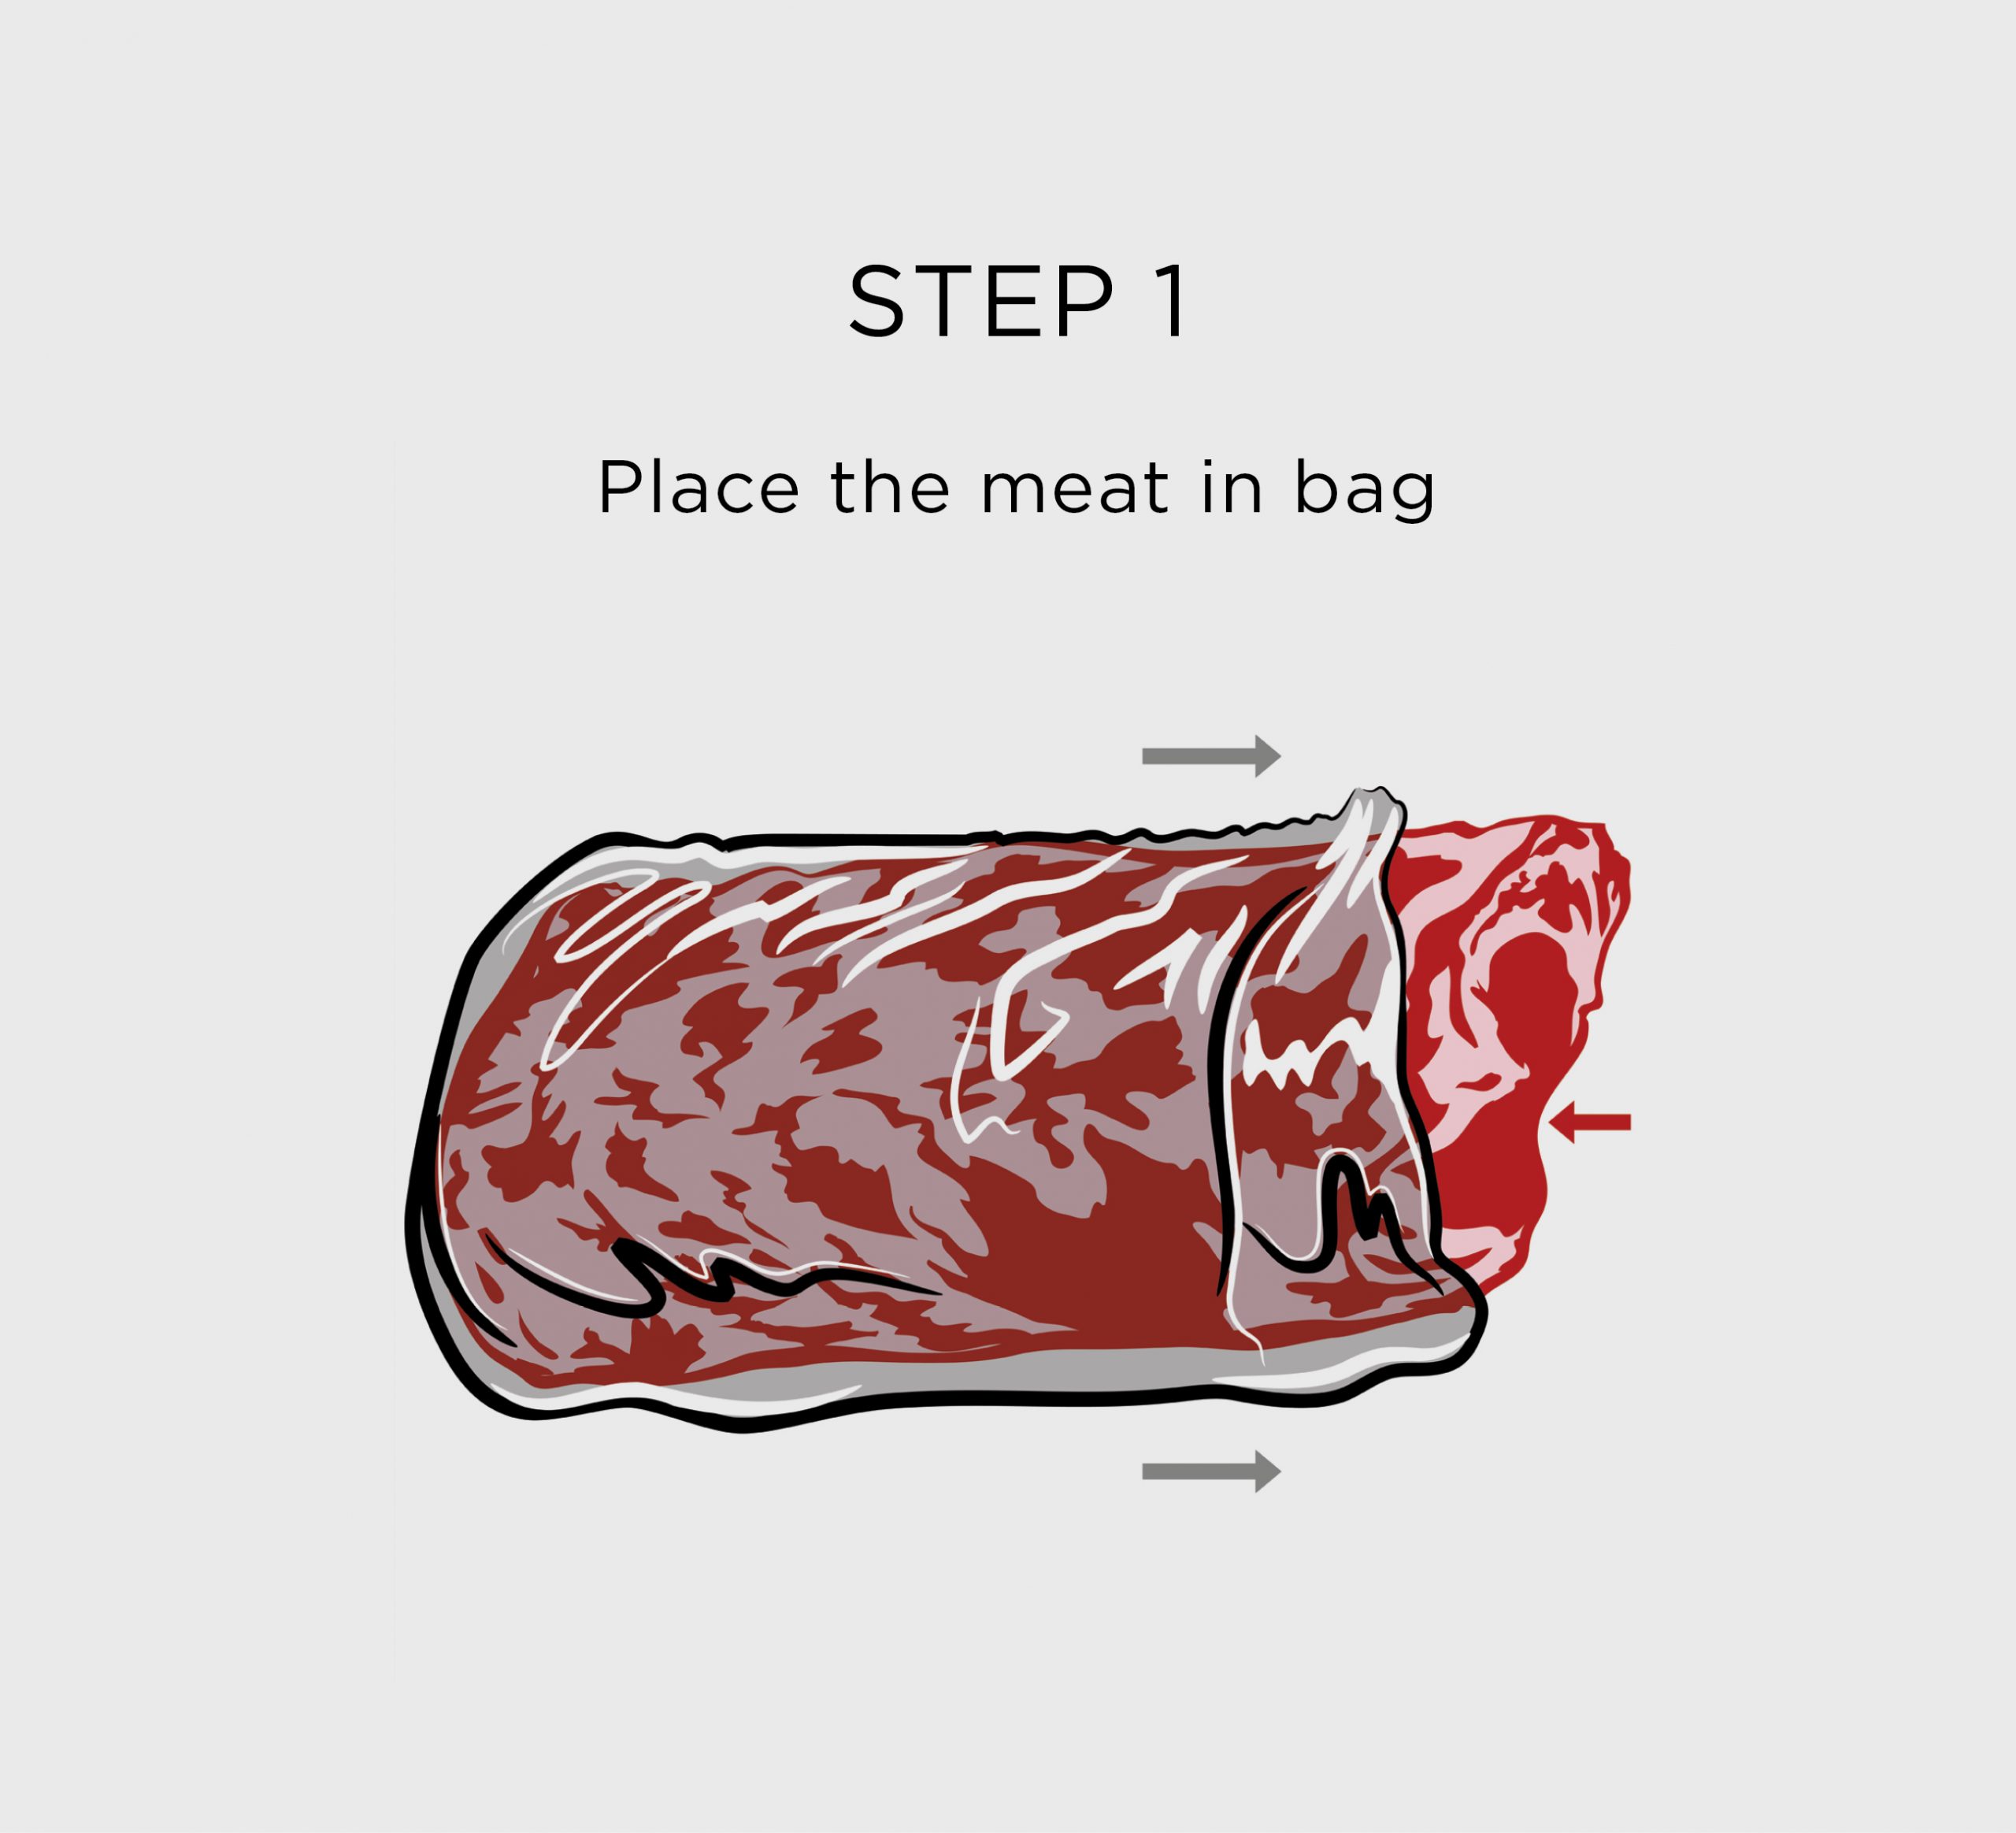 Step 1: Place the meat in the bag